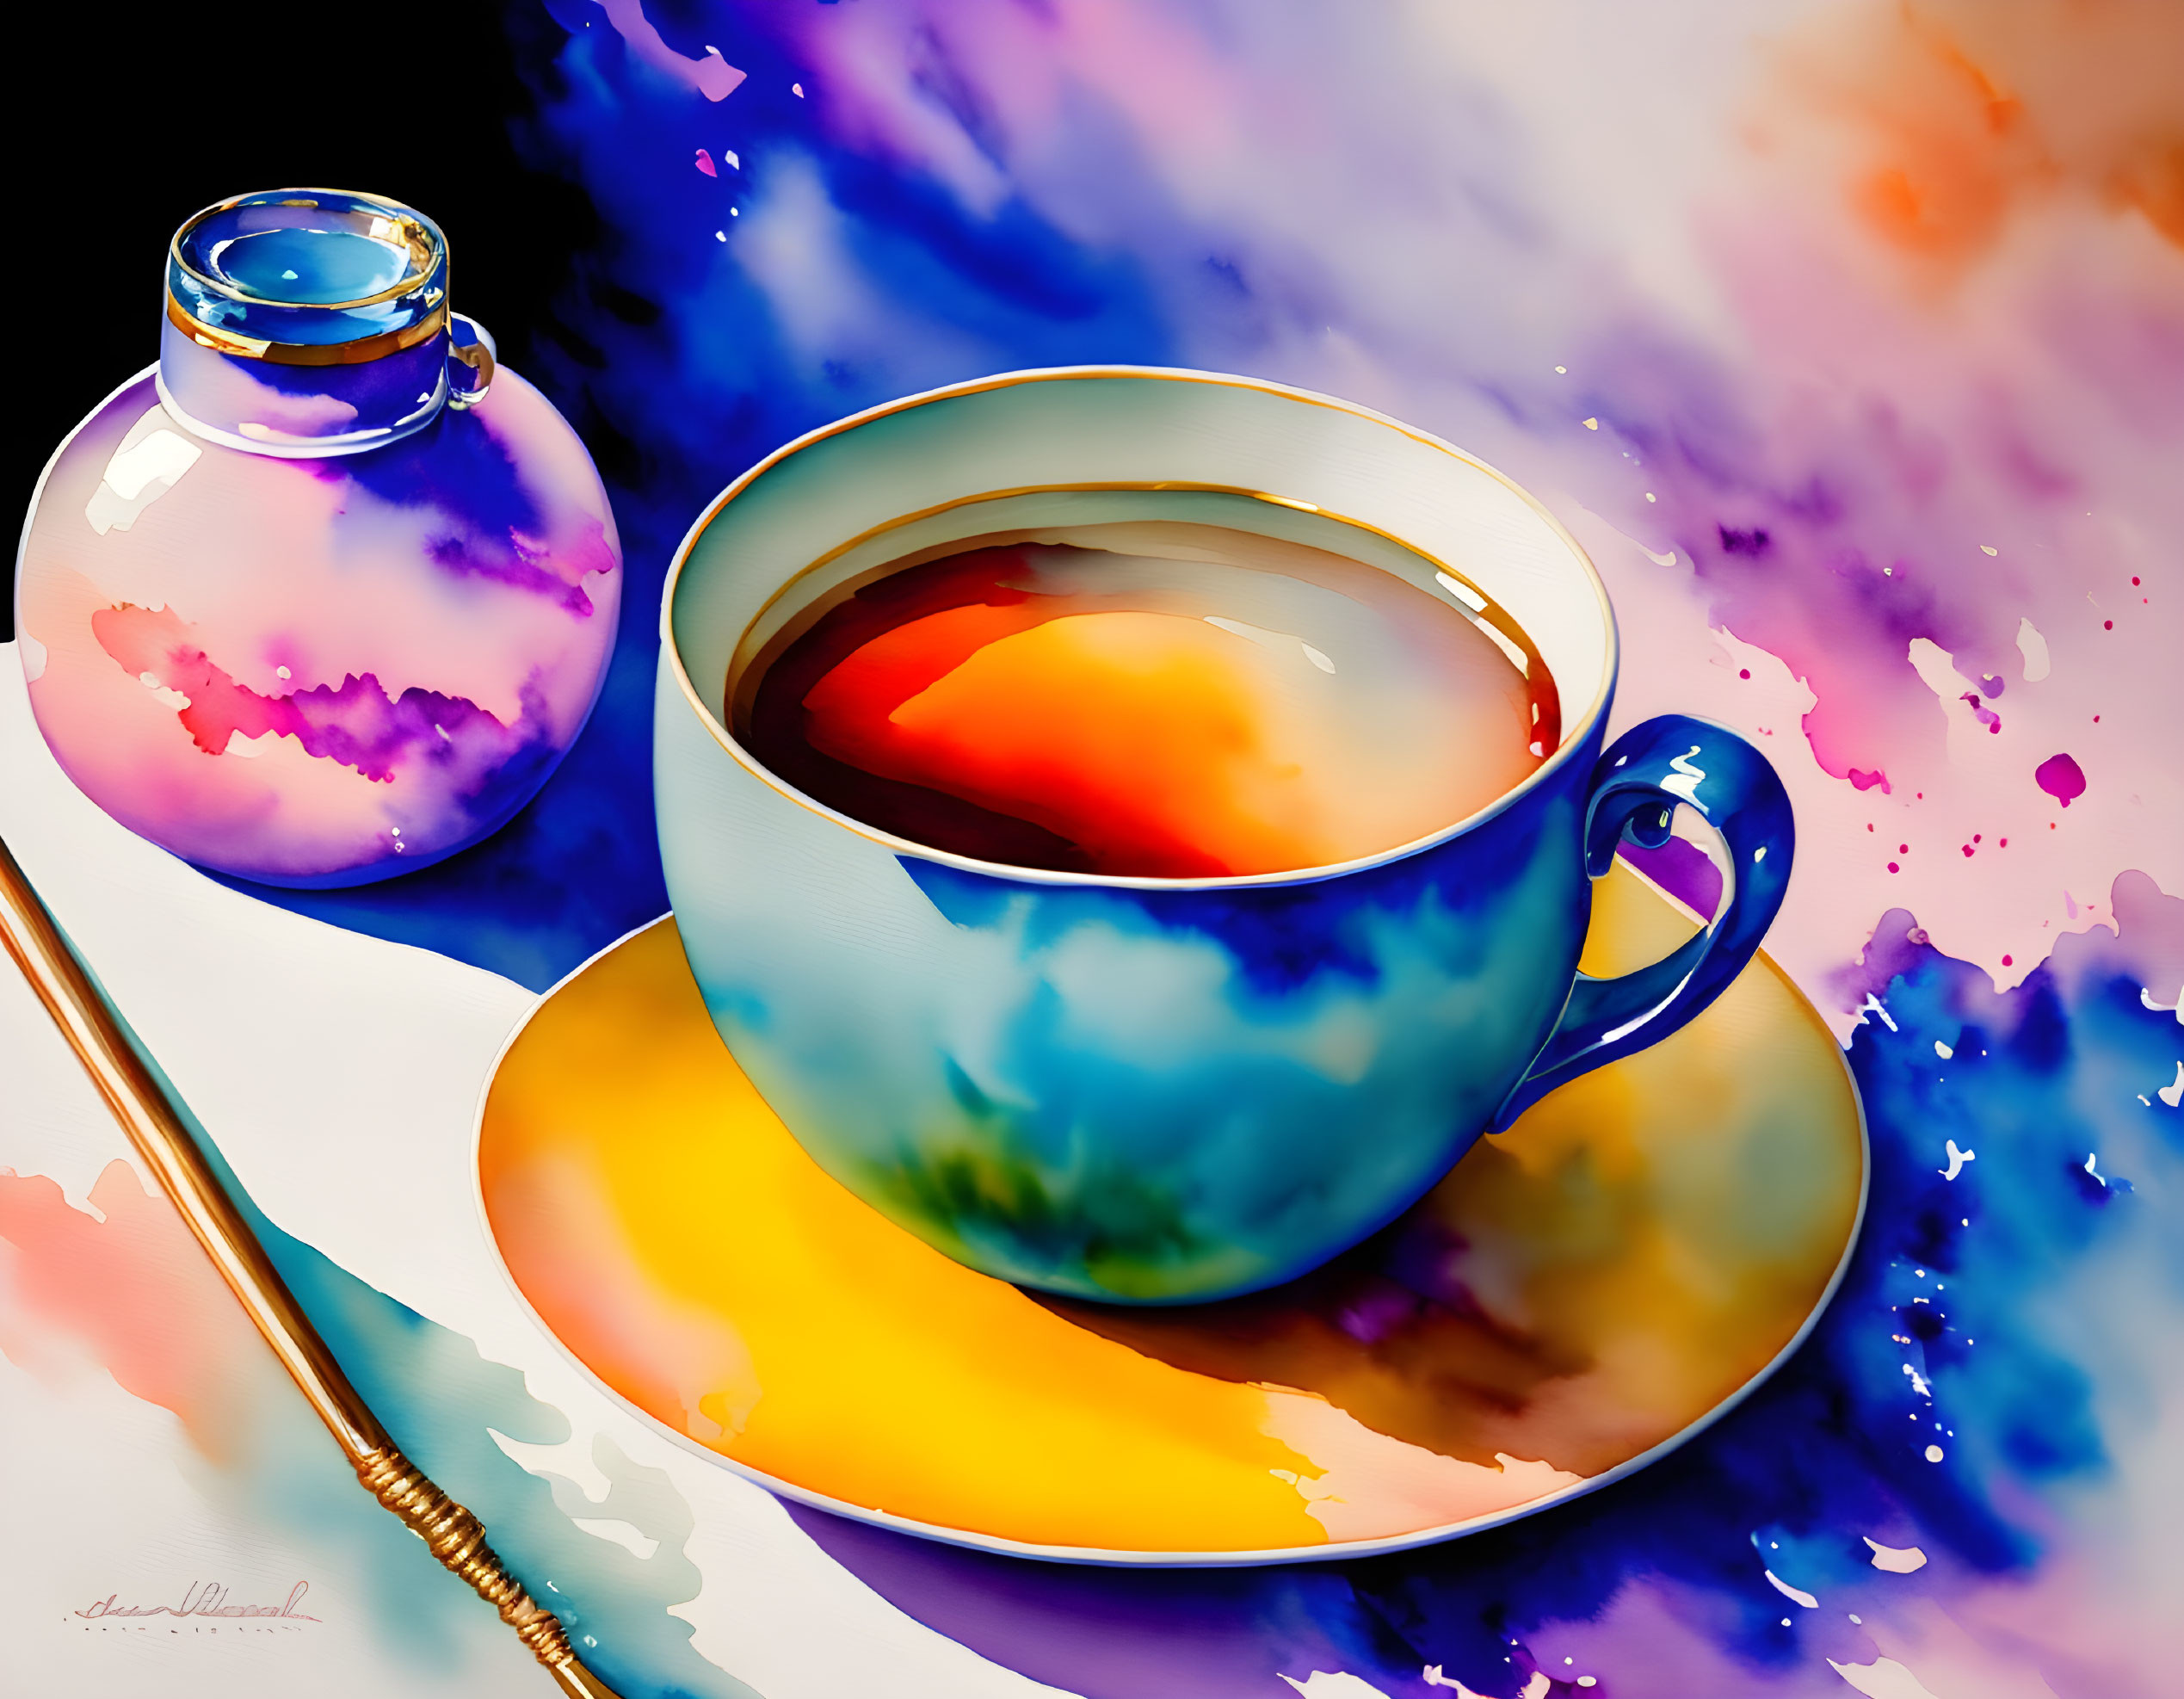 Colorful Watercolor Illustration of Tea Cup, Spoon, and Ink Bottle